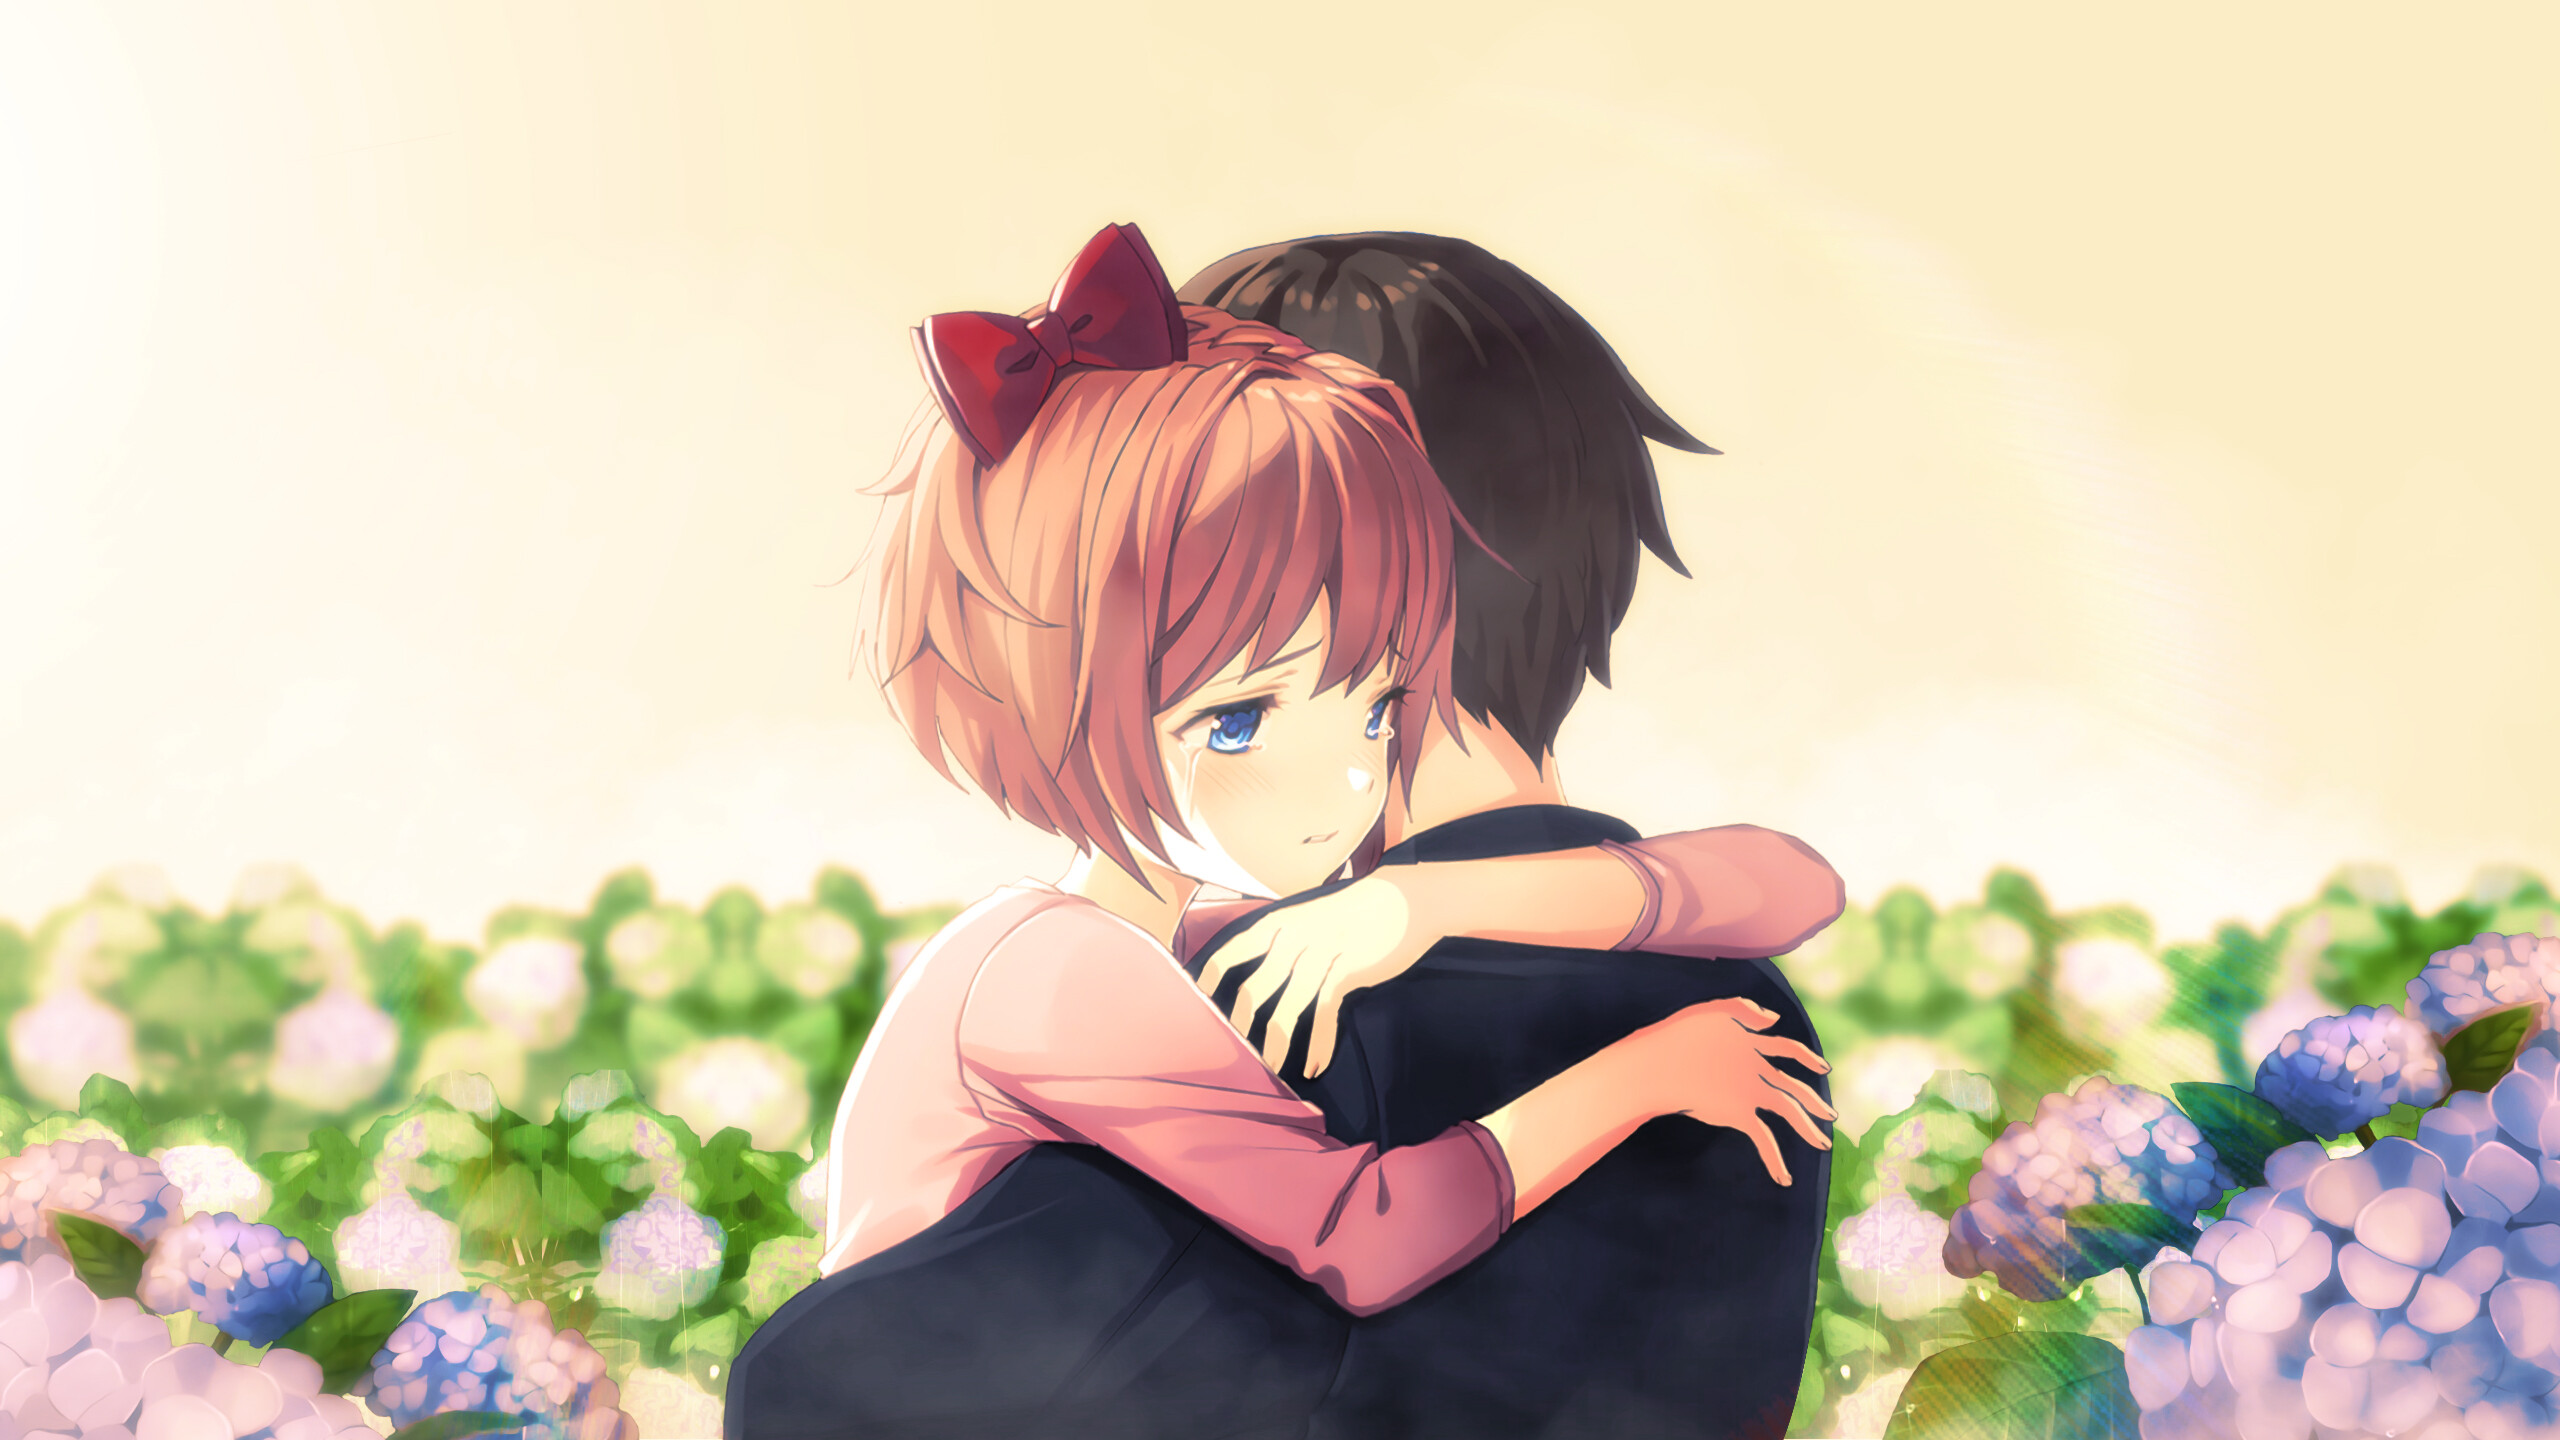 Anime couple hug, Cute and cuddly, Vibrant artwork, Emotional connection, 2560x1440 HD Desktop